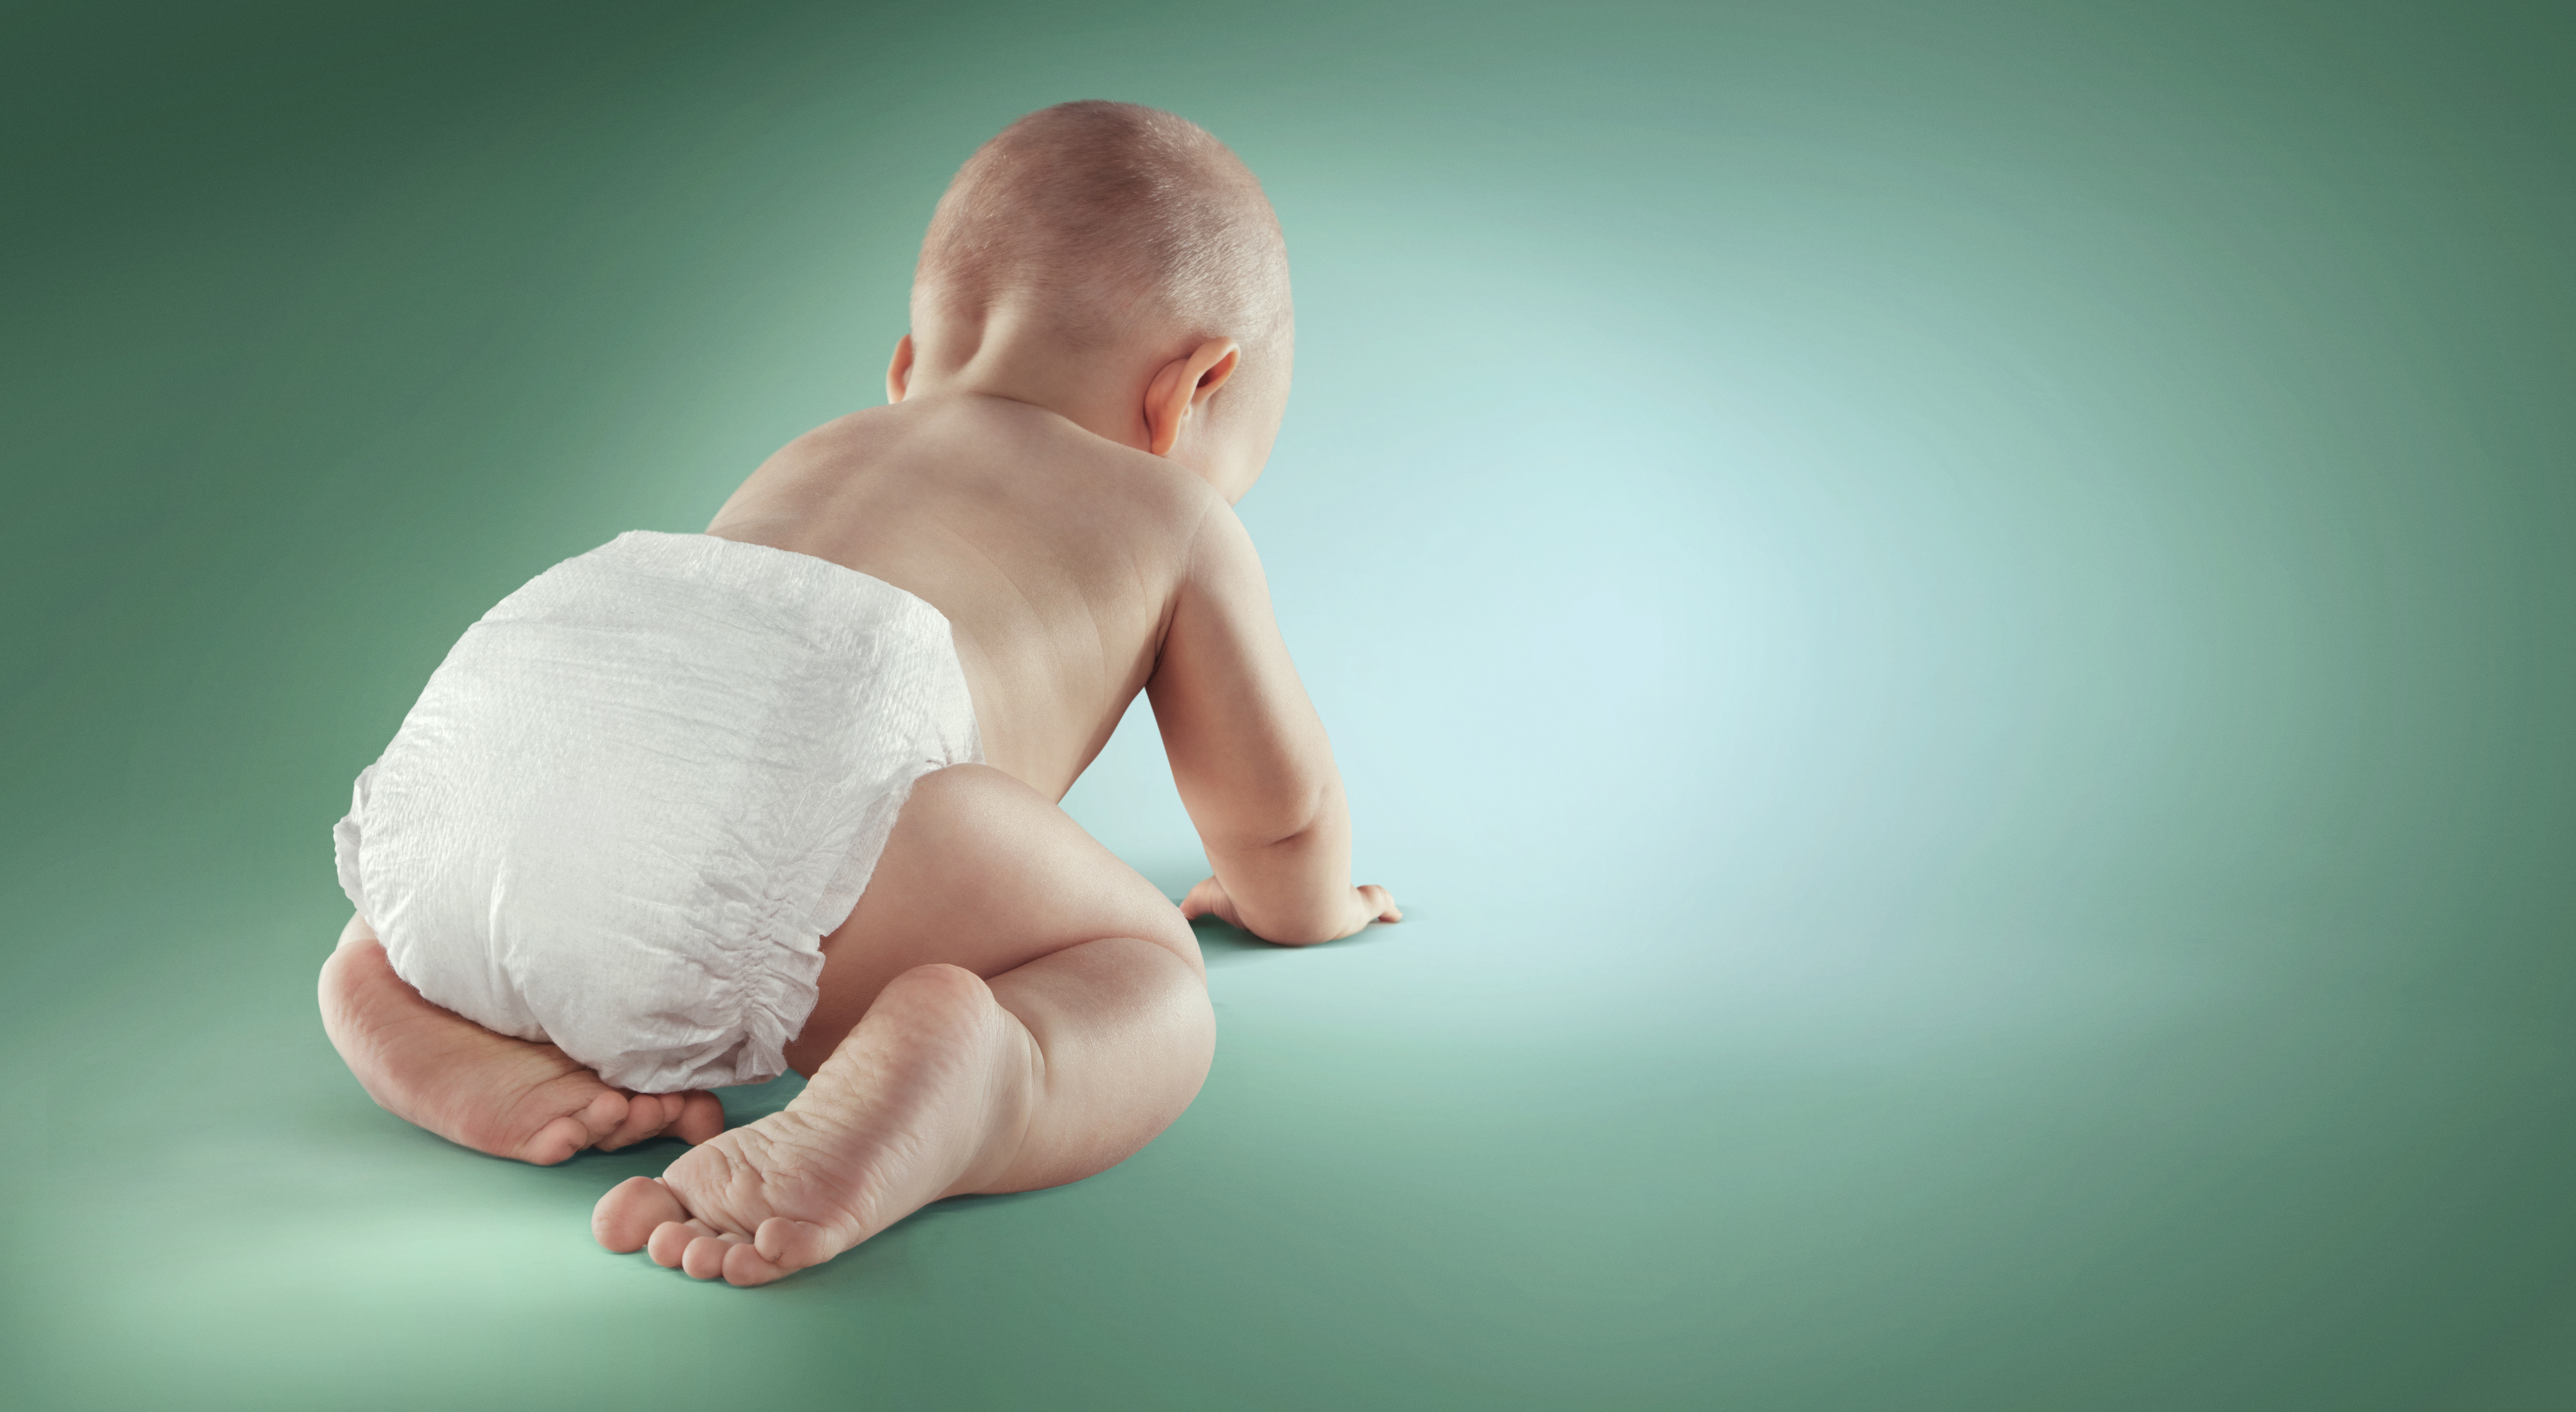 white baby crawling on a green background